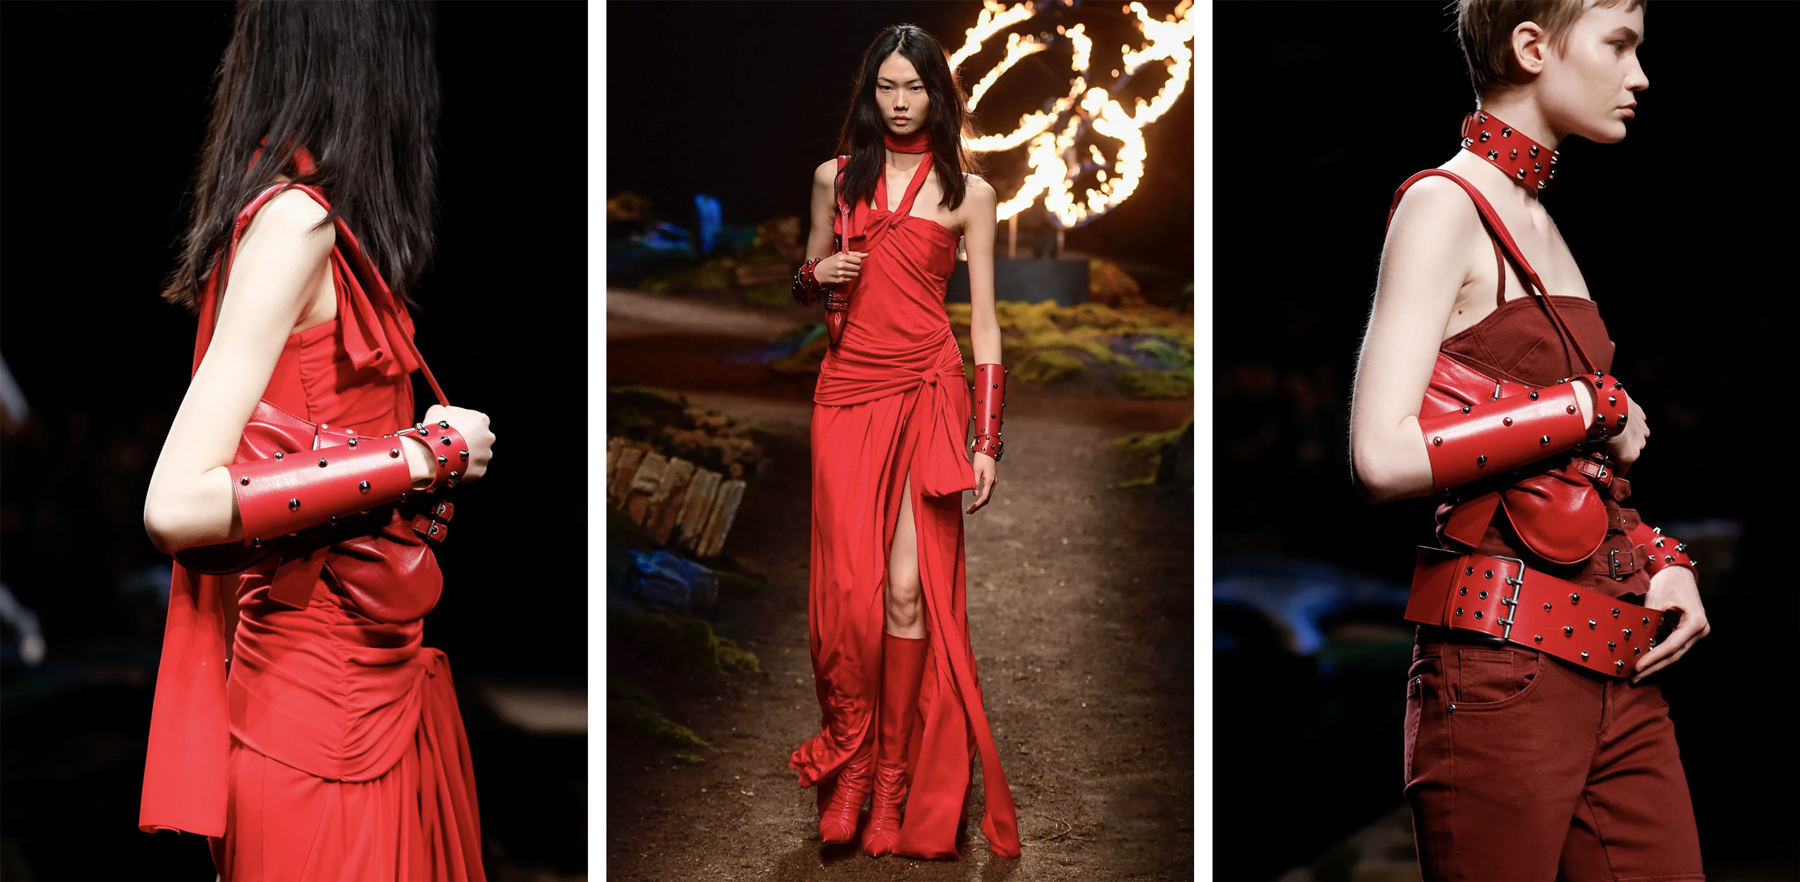 Blumarine's FW23 show, imagined by former creative director Nicola Brognano, paid homage to Joan of Arc, referring to the famous film role of muse Milla Jovovich. Red was therefore a key colour to steer Blumarine towards sensuality, independence, intensity and danger